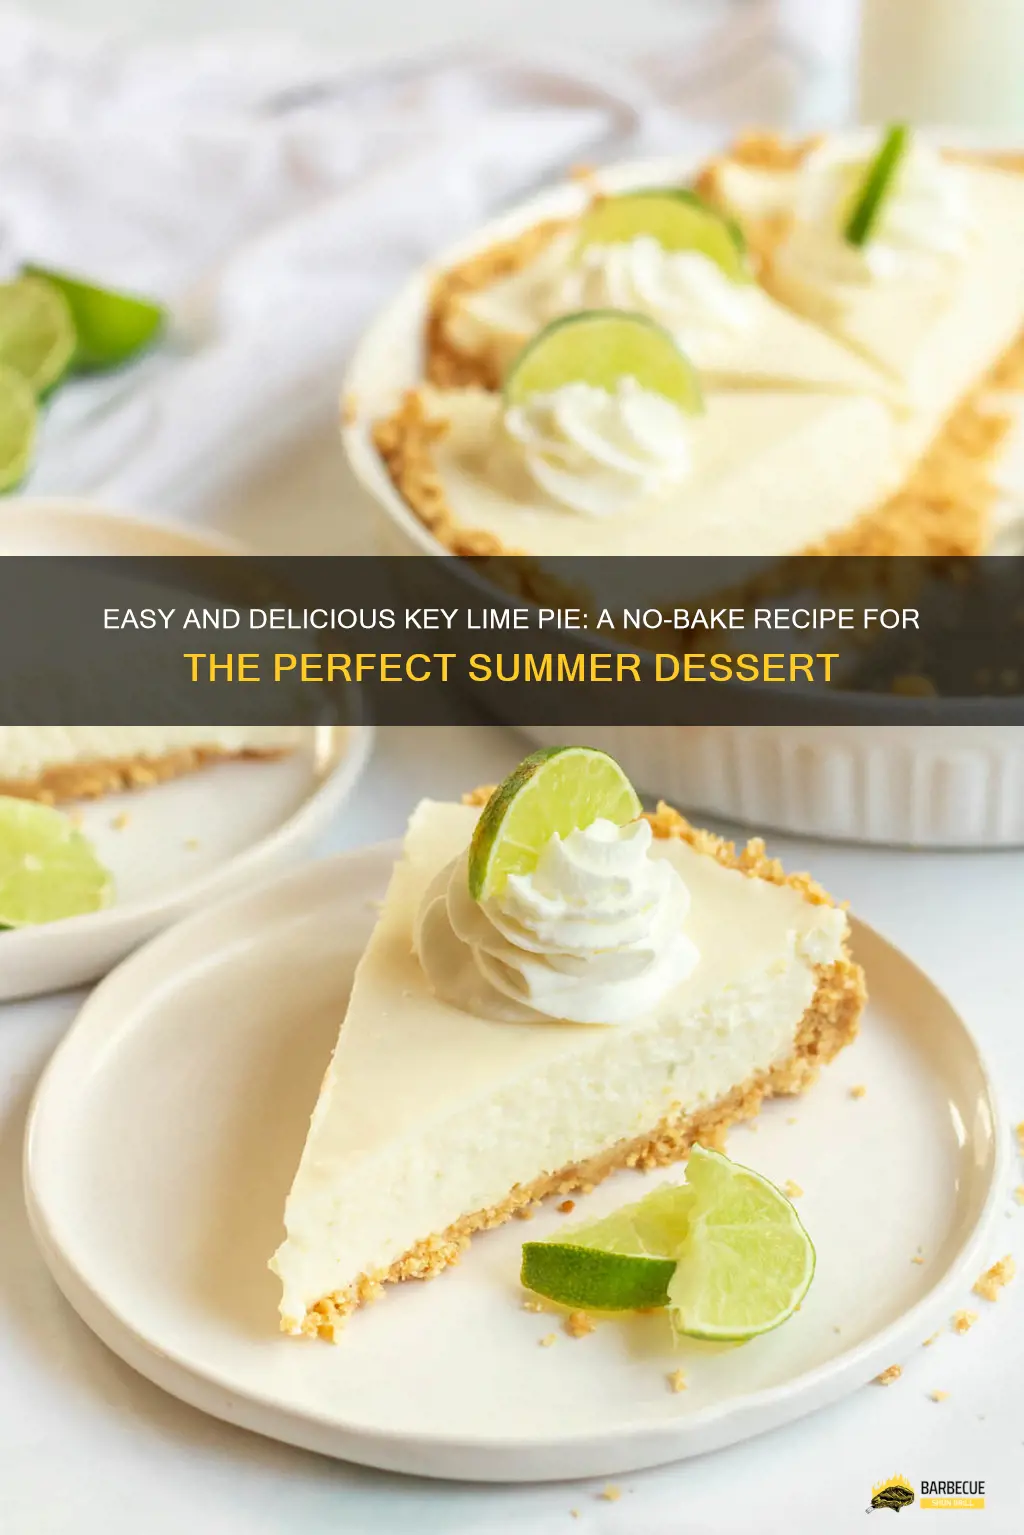 Easy And Delicious Key Lime Pie: A No-Bake Recipe For The Perfect ...